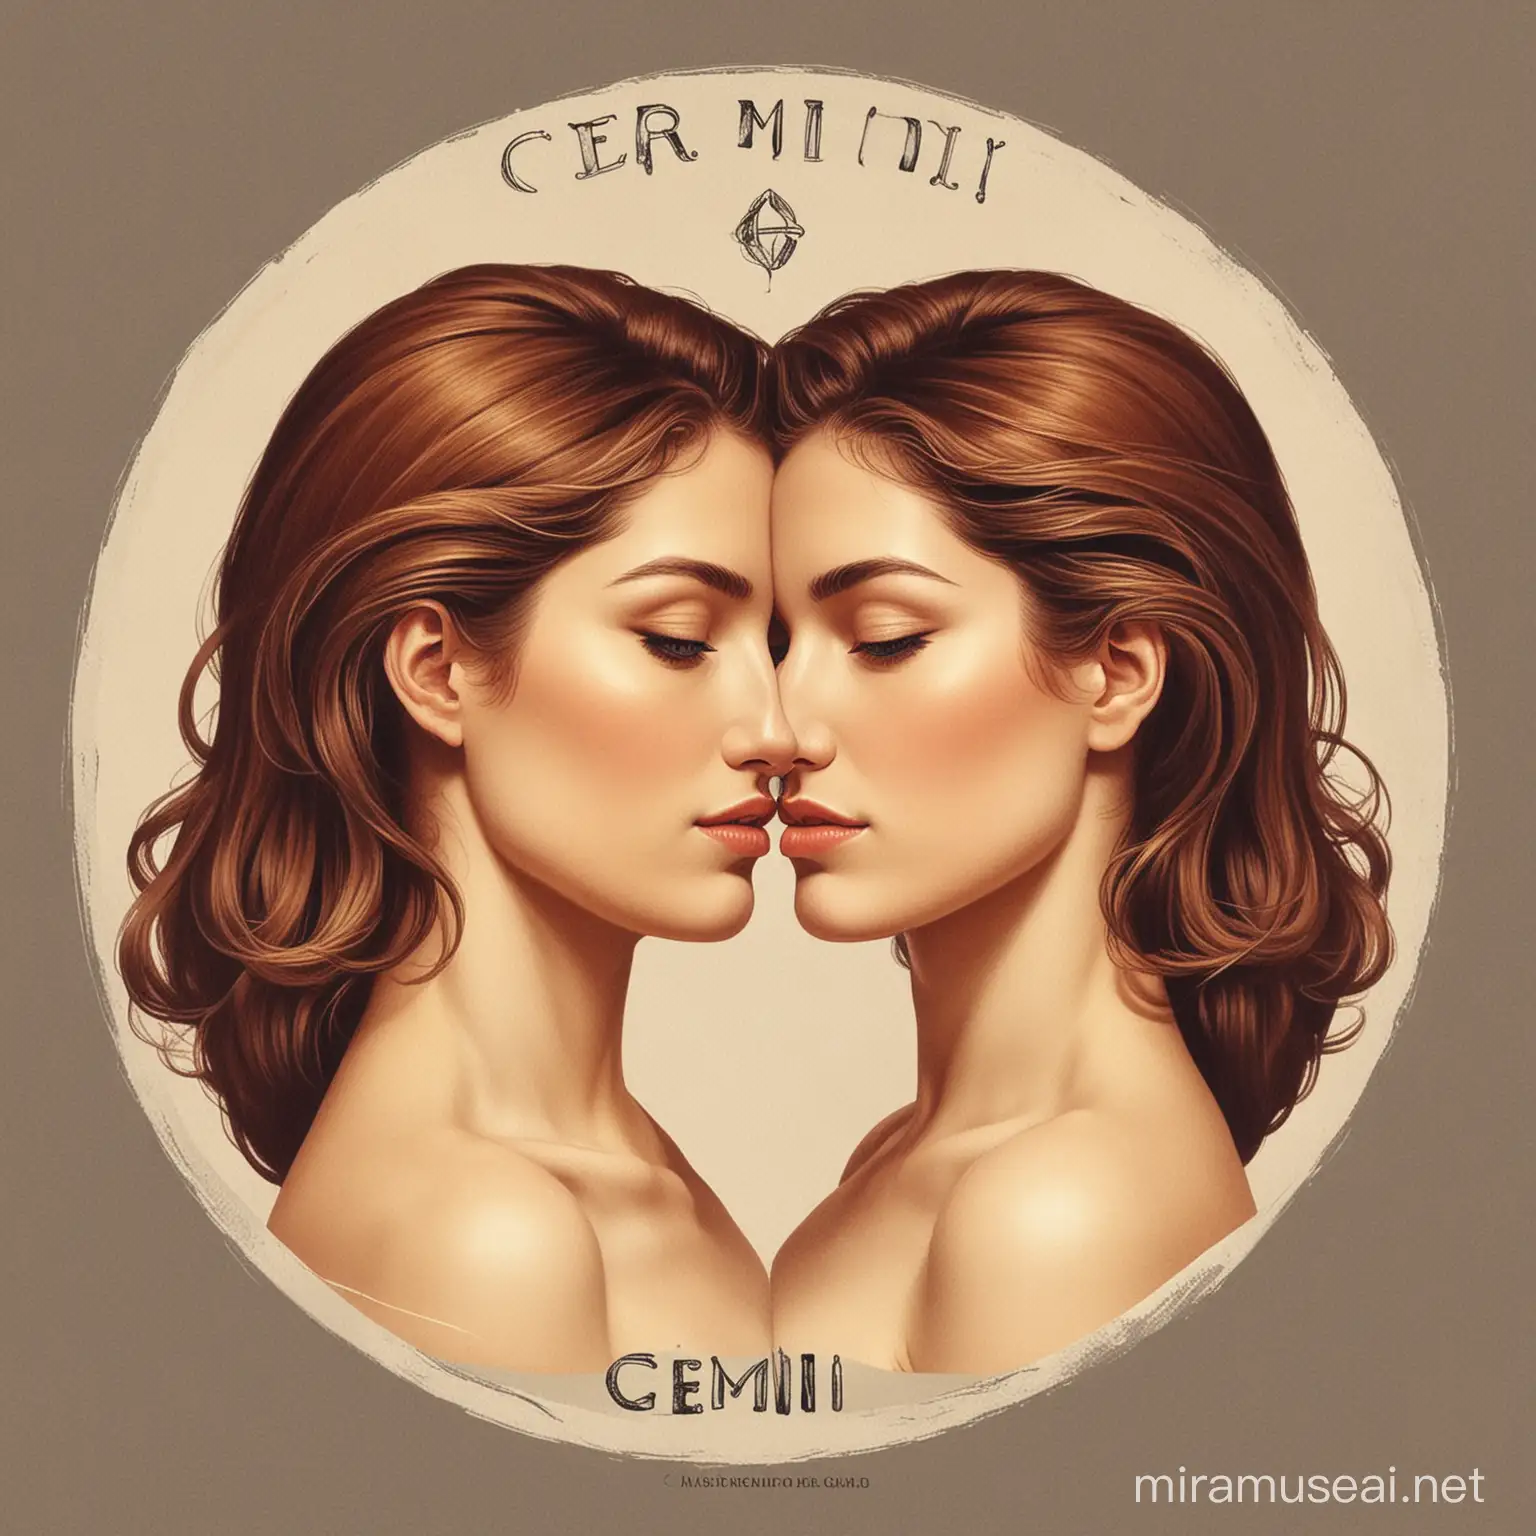 Gemini Woman with Celestial Aura and Twin Symbol